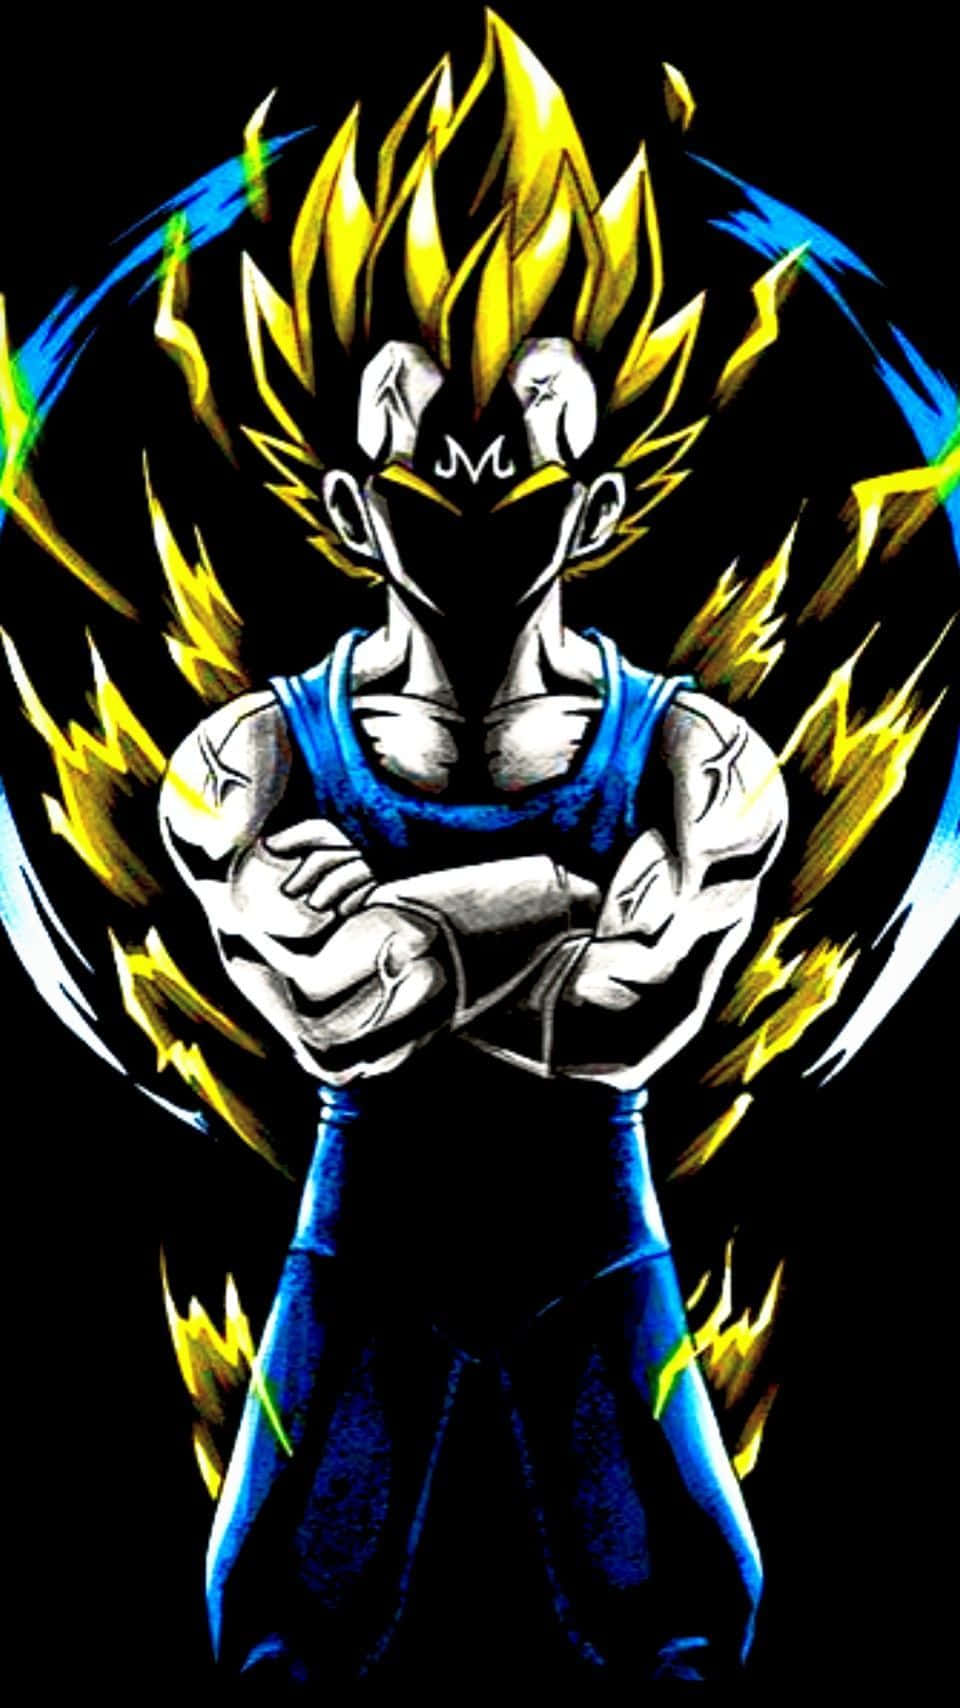 The mighty Vegeta - Prince of all Saiyans, showcasing his power and fierce determination in a high-quality, dynamic background.